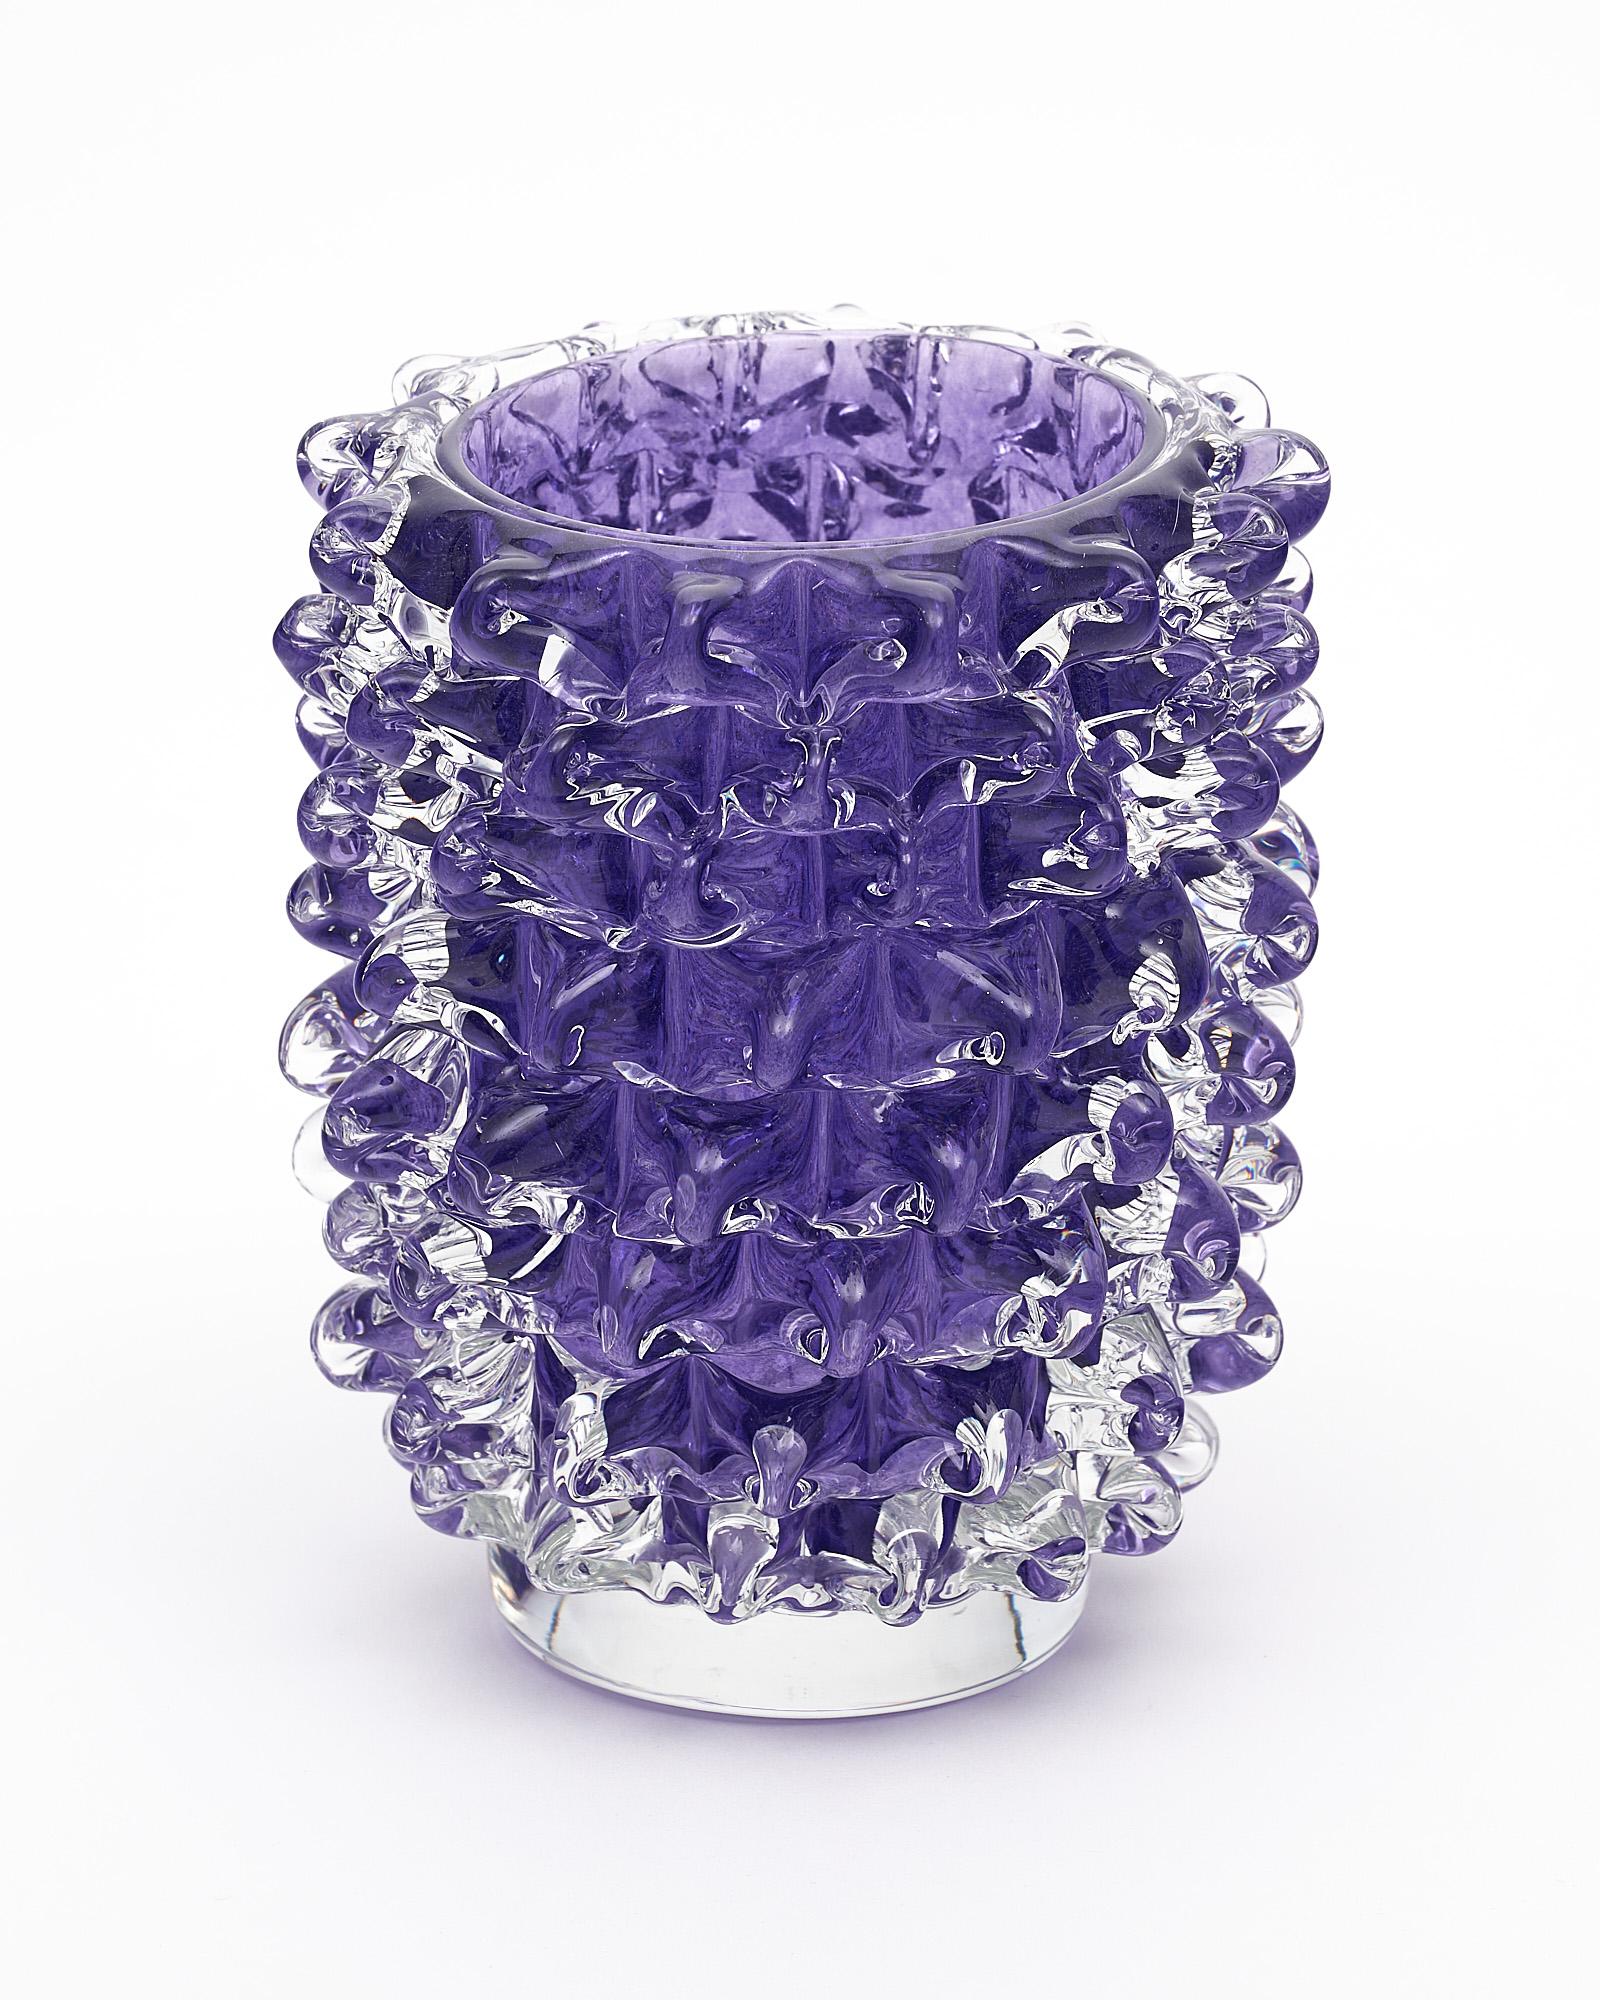 Murano glass vase, Italian, from the island of Murano. This hand-blown piece has a striking purple color and is made with the rostrate technique.